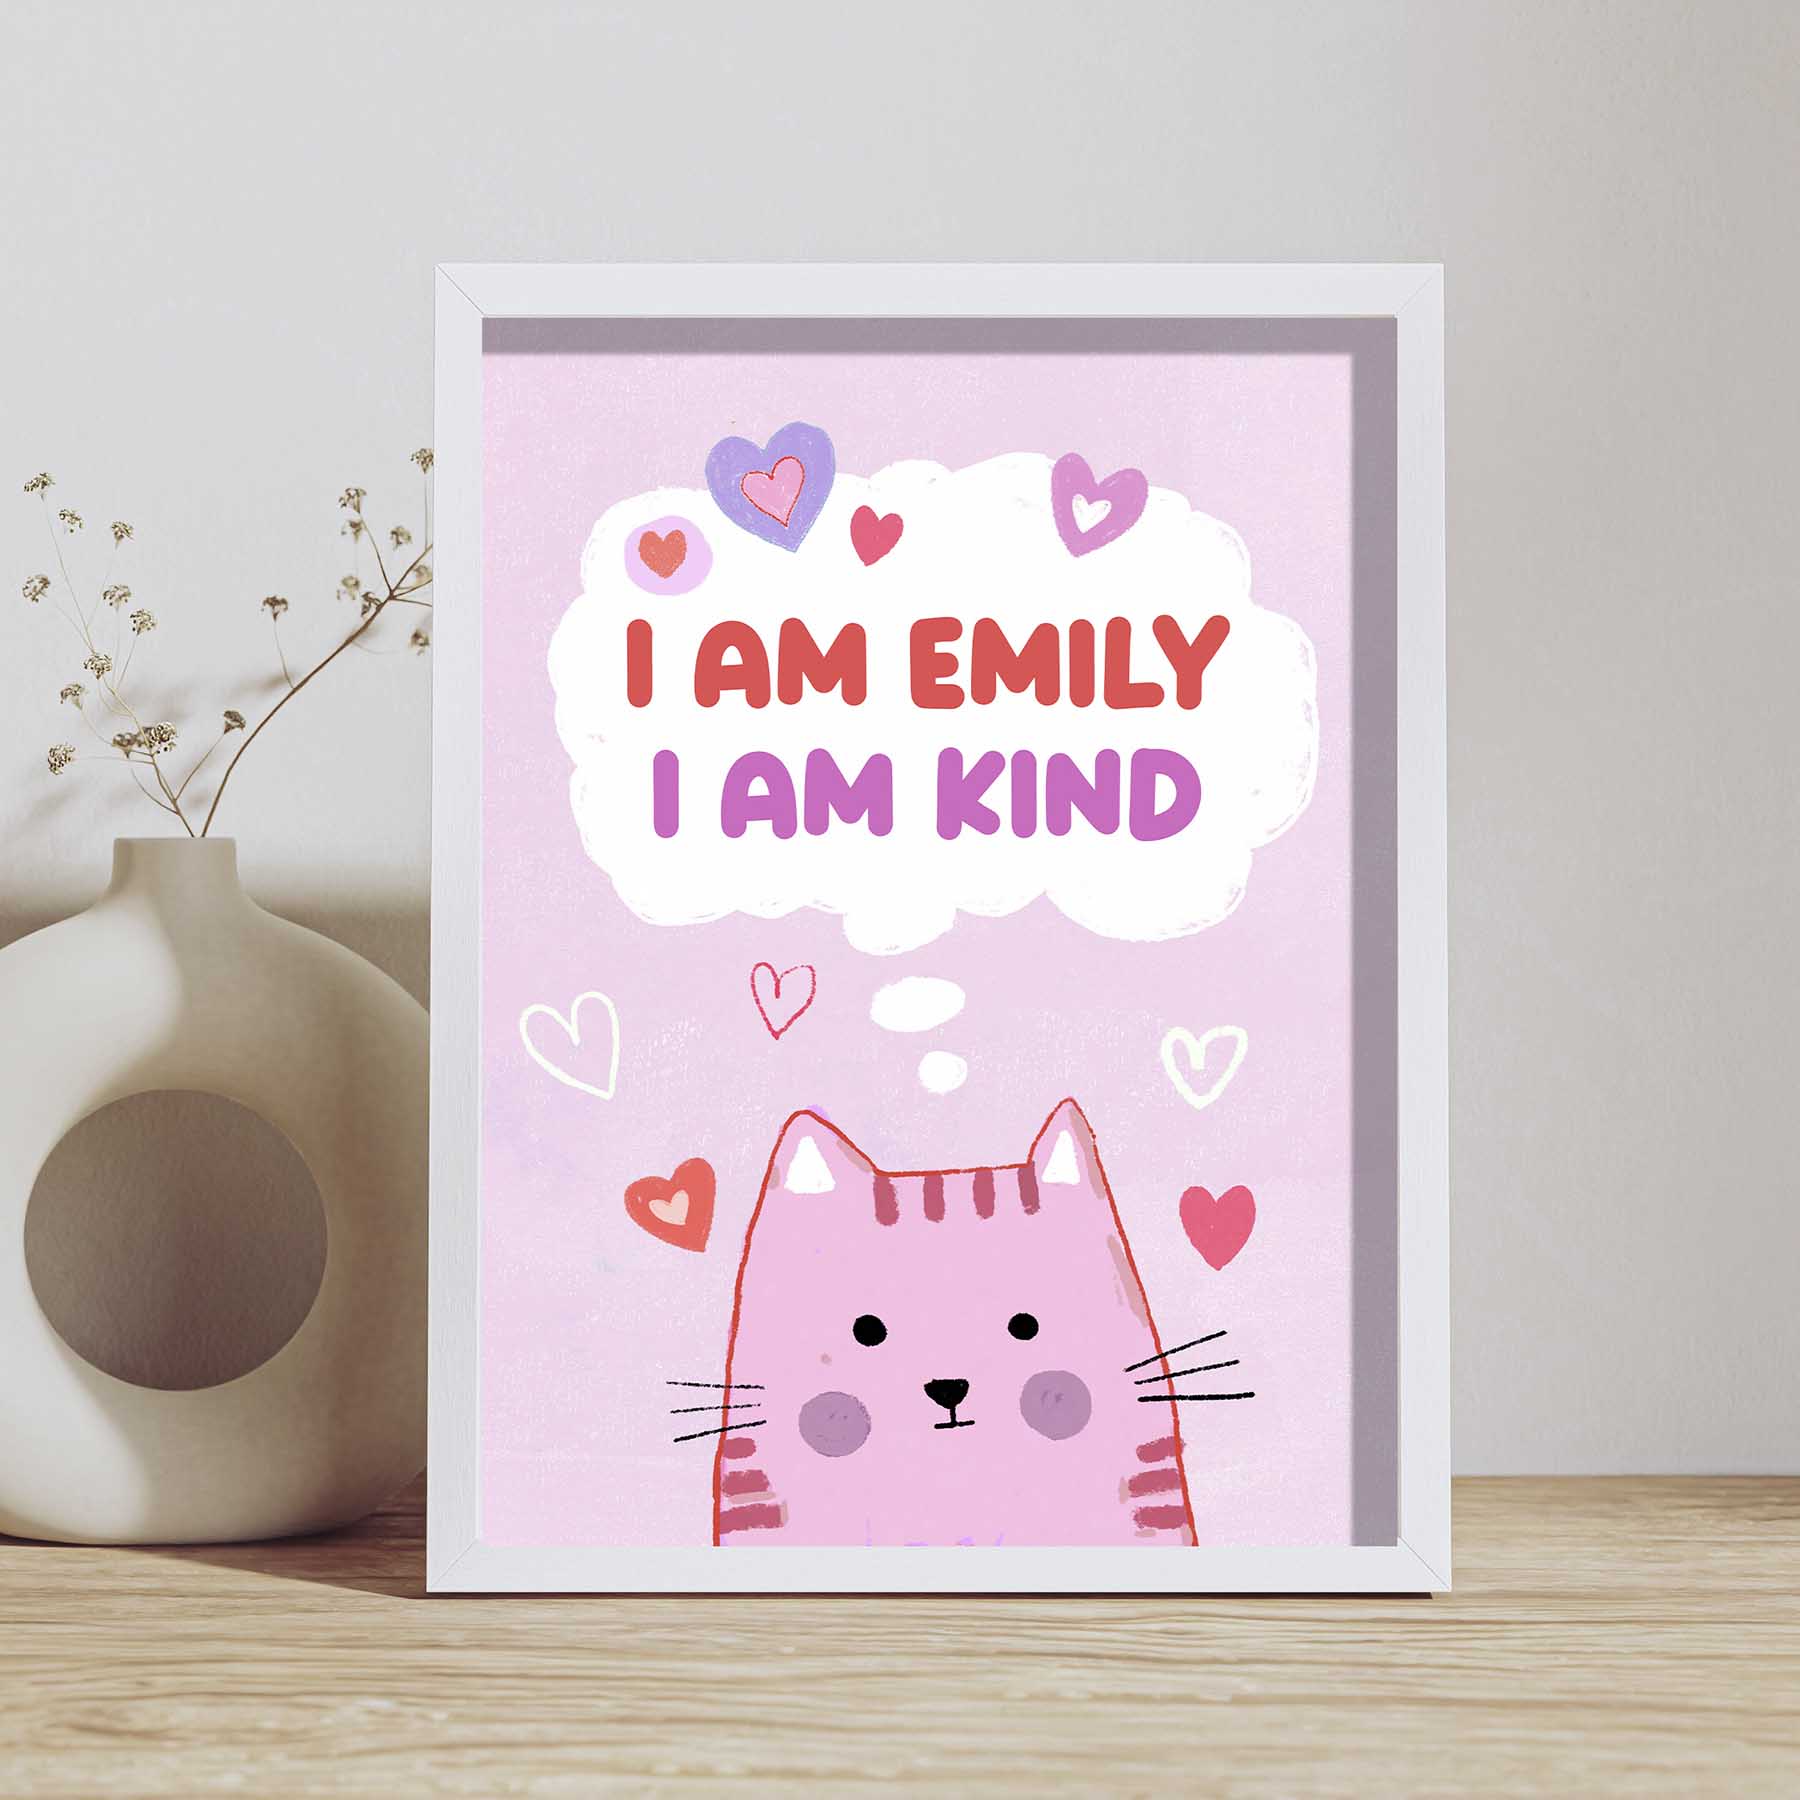 "Adorable cat illustration with positive messages, ideal for boosting kids' confidence in nurseries."